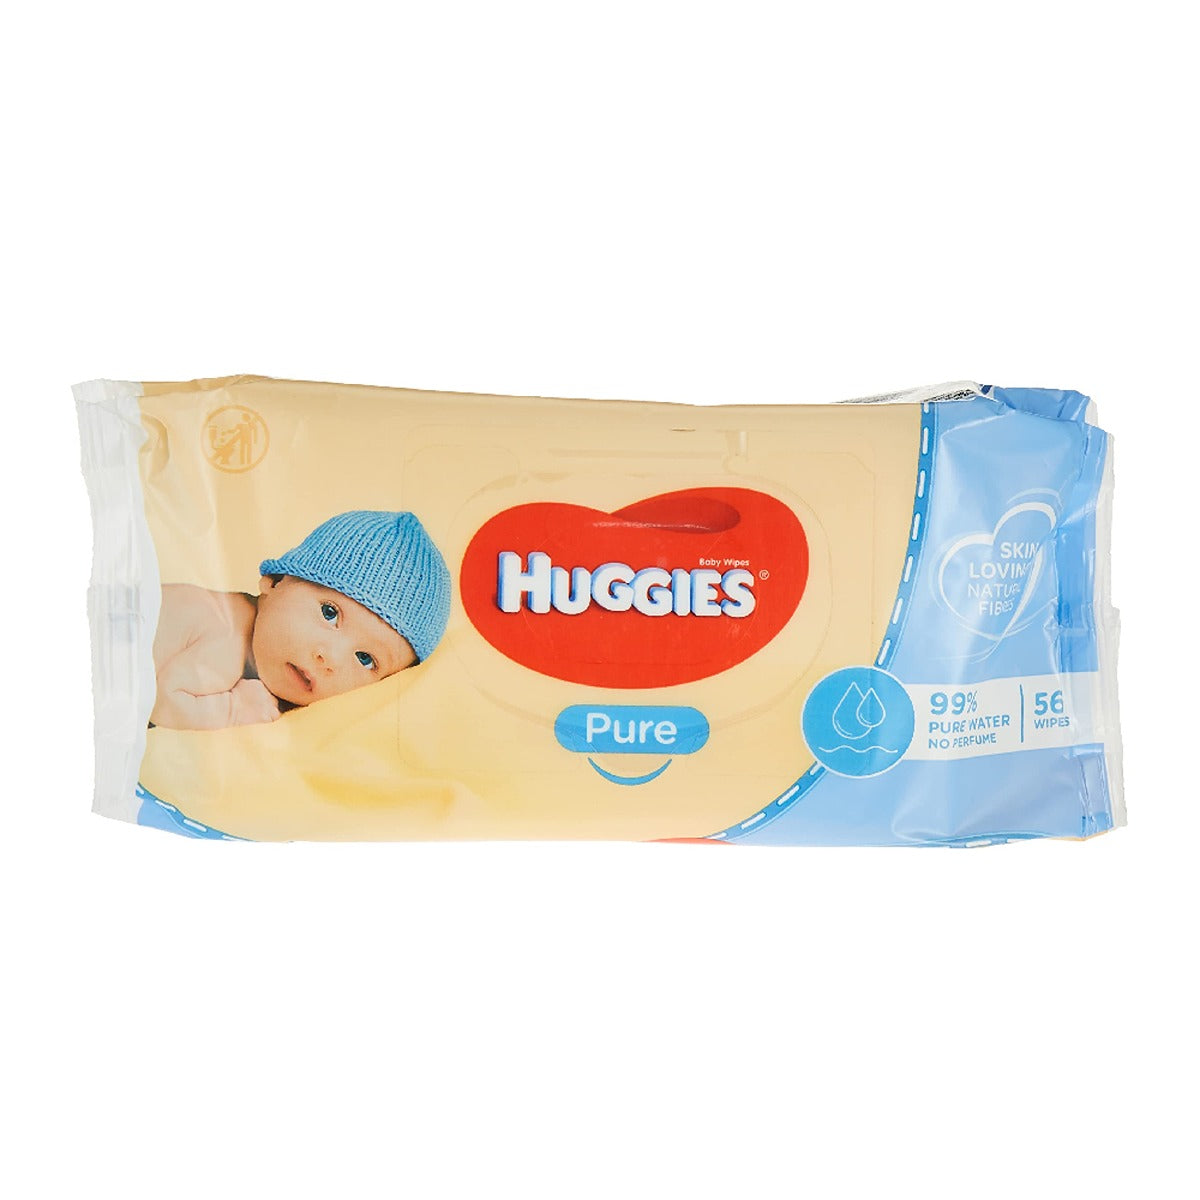 Huggies - Baby Wipes - Pack of 56 - Continental Food Store